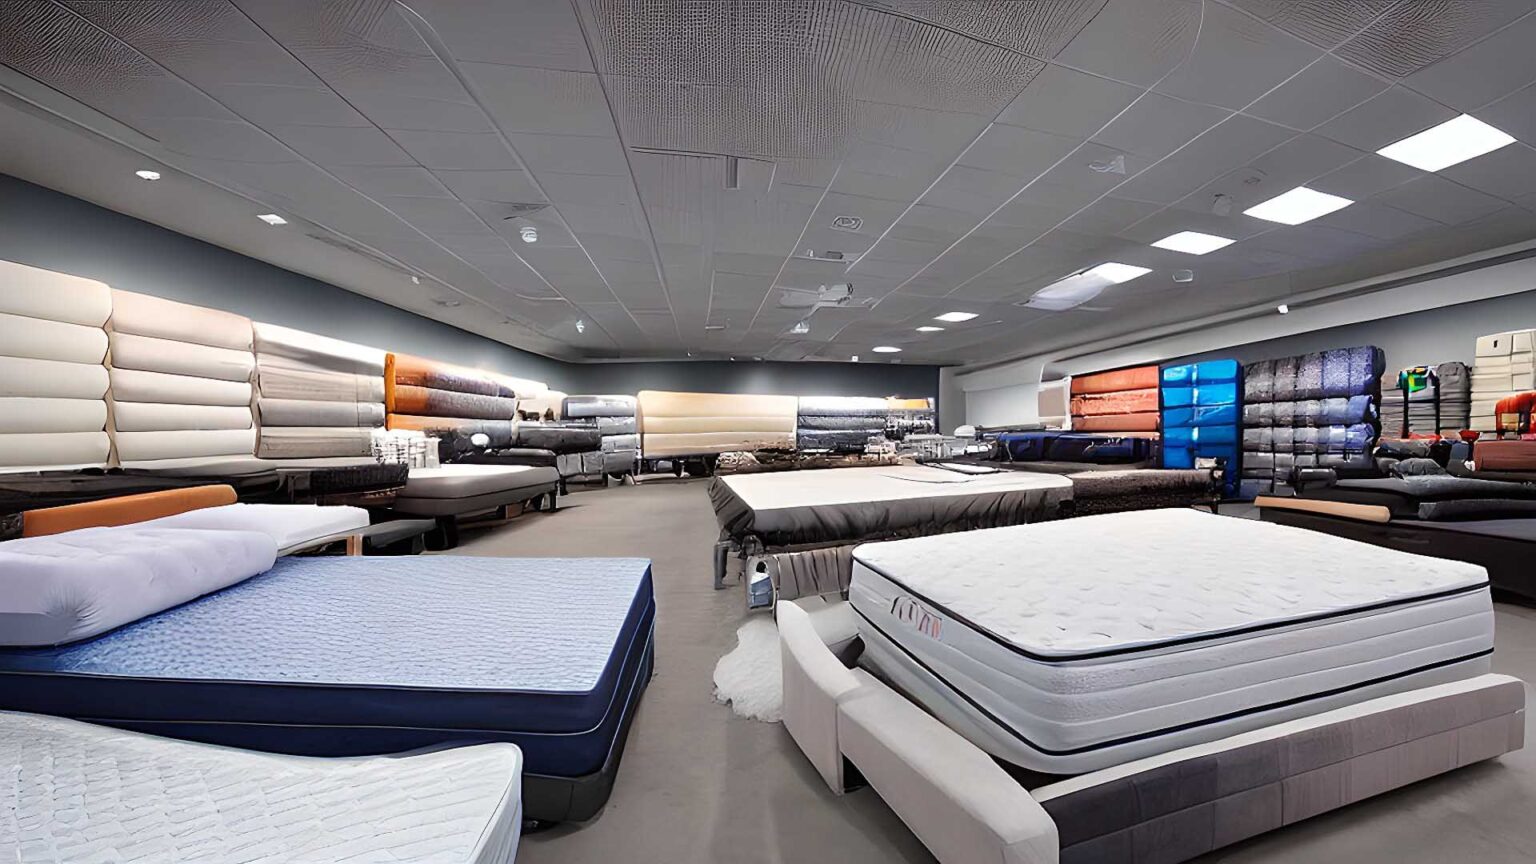 Mattress Stores, mattress dealers, and mattress retailers near me in Lawrence, MA